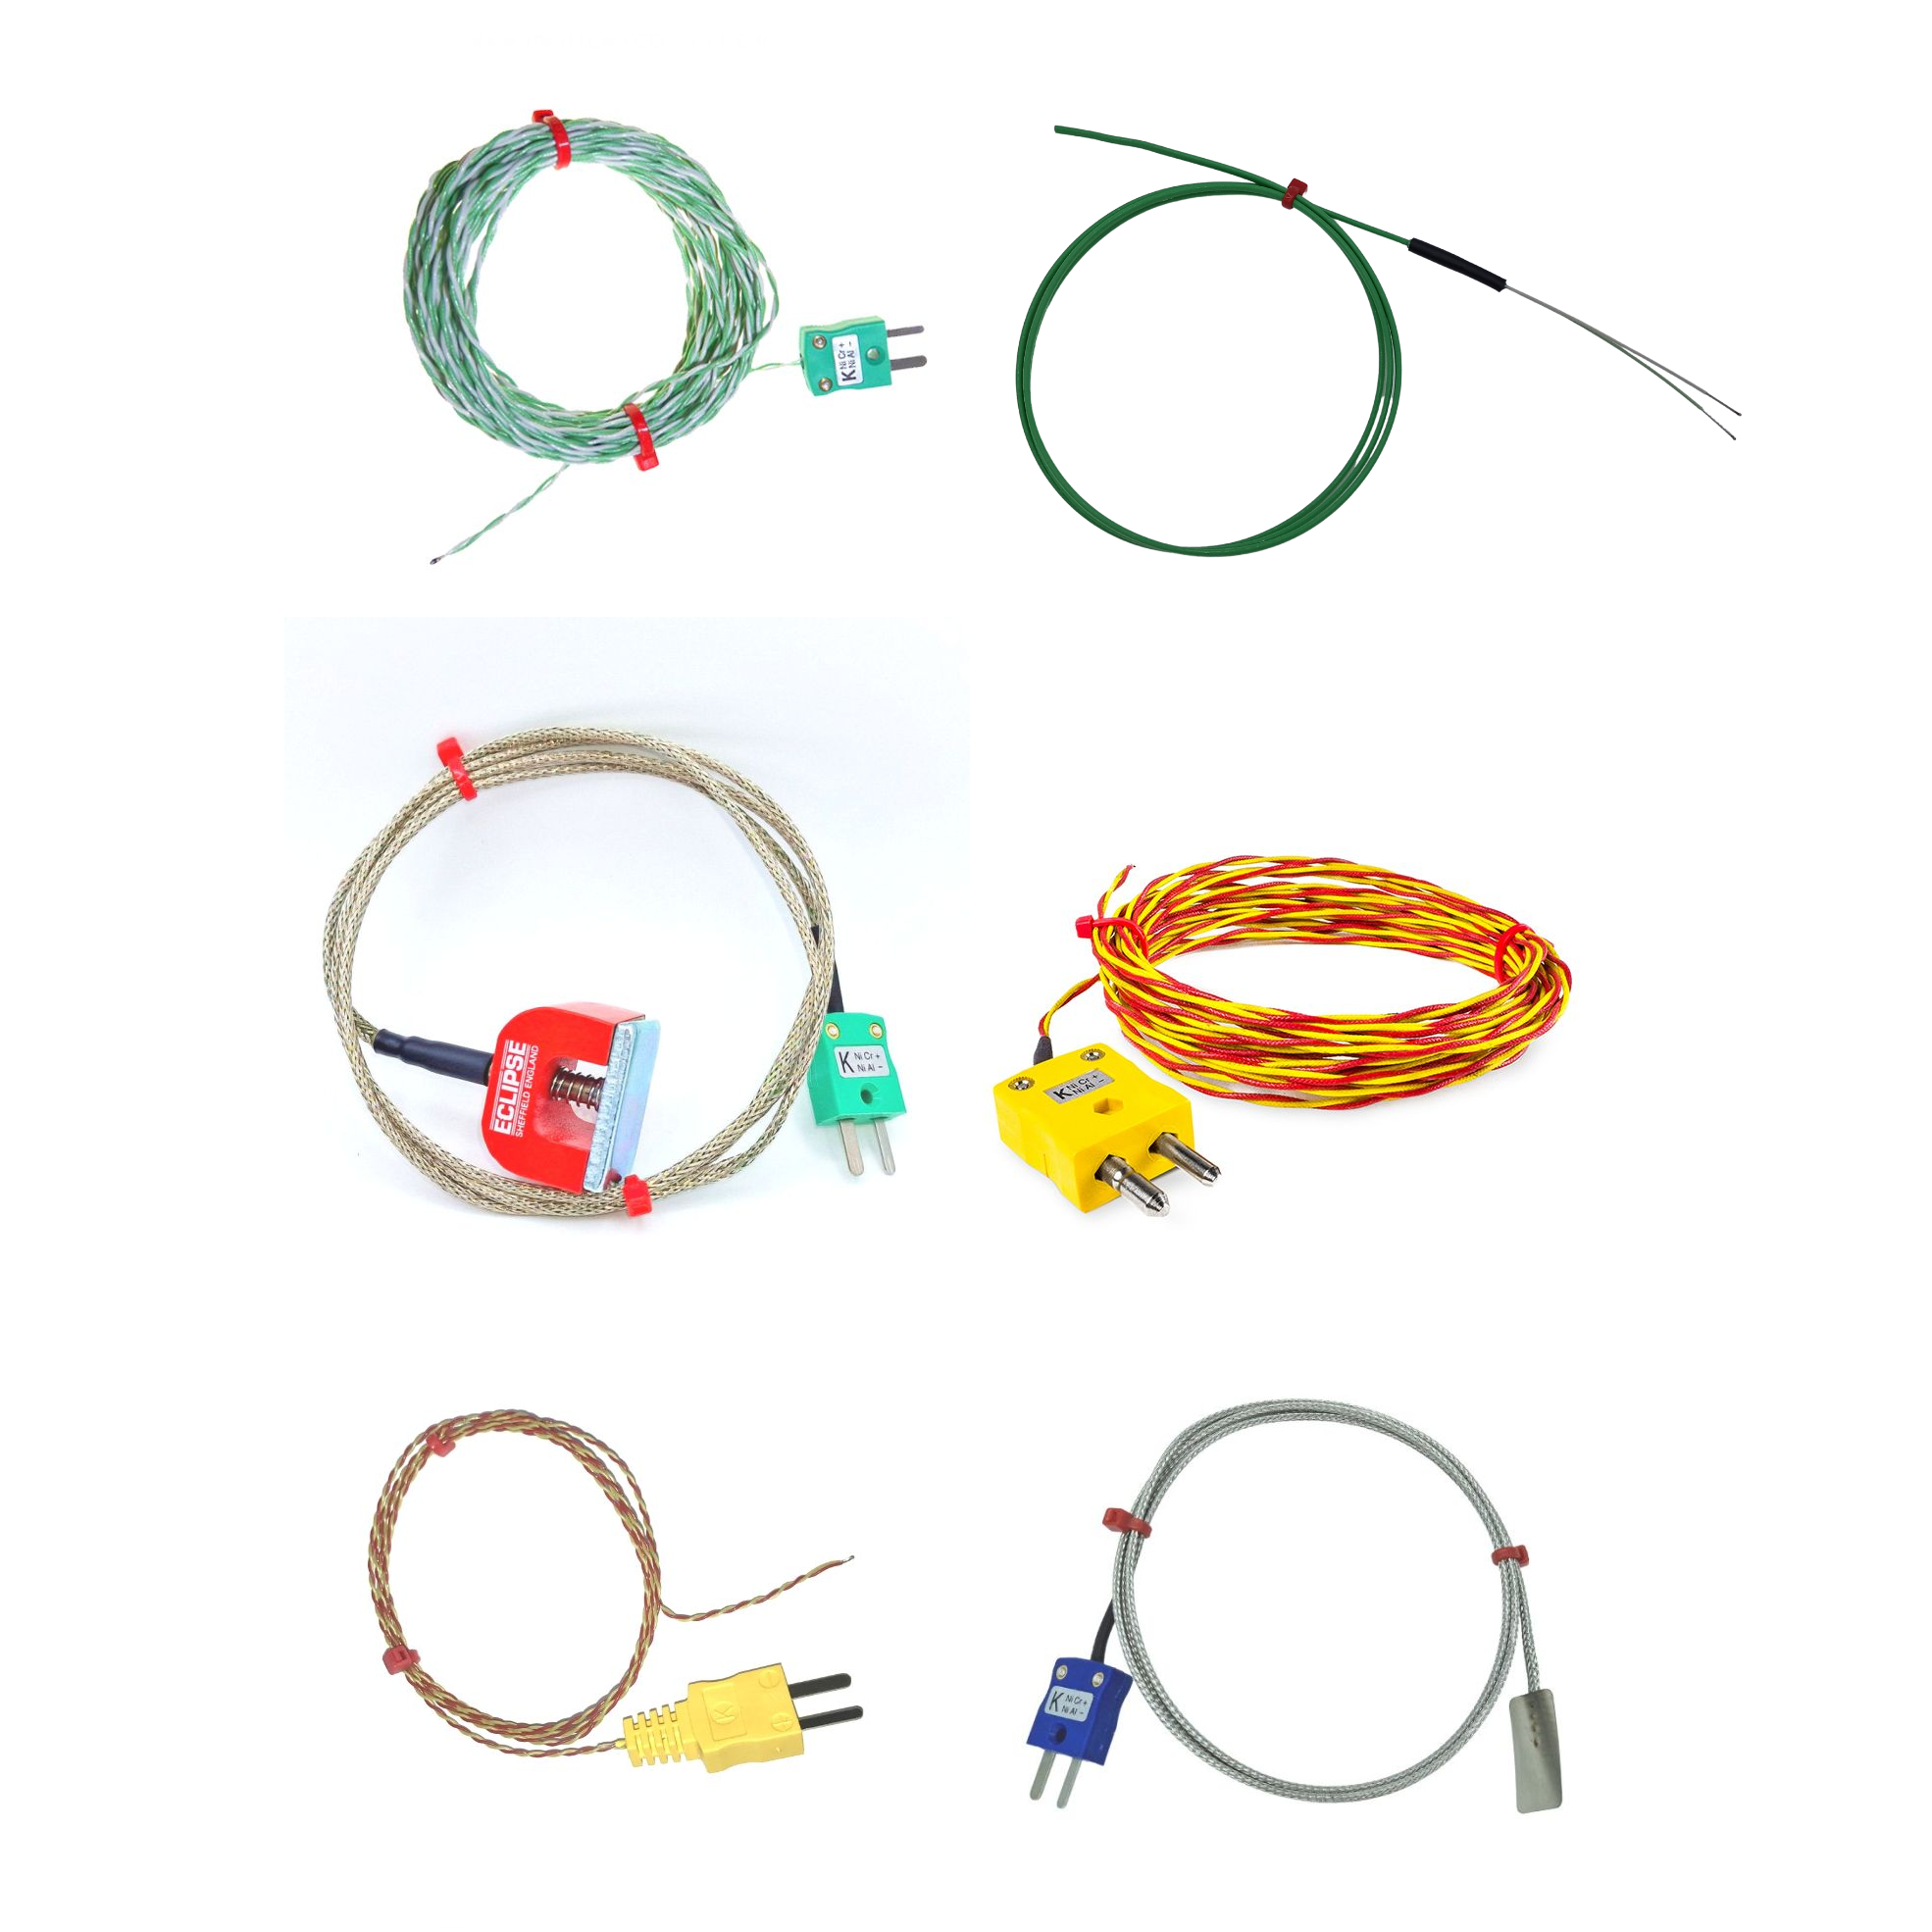 7 Factors to Consider When Selecting a Thermocouple